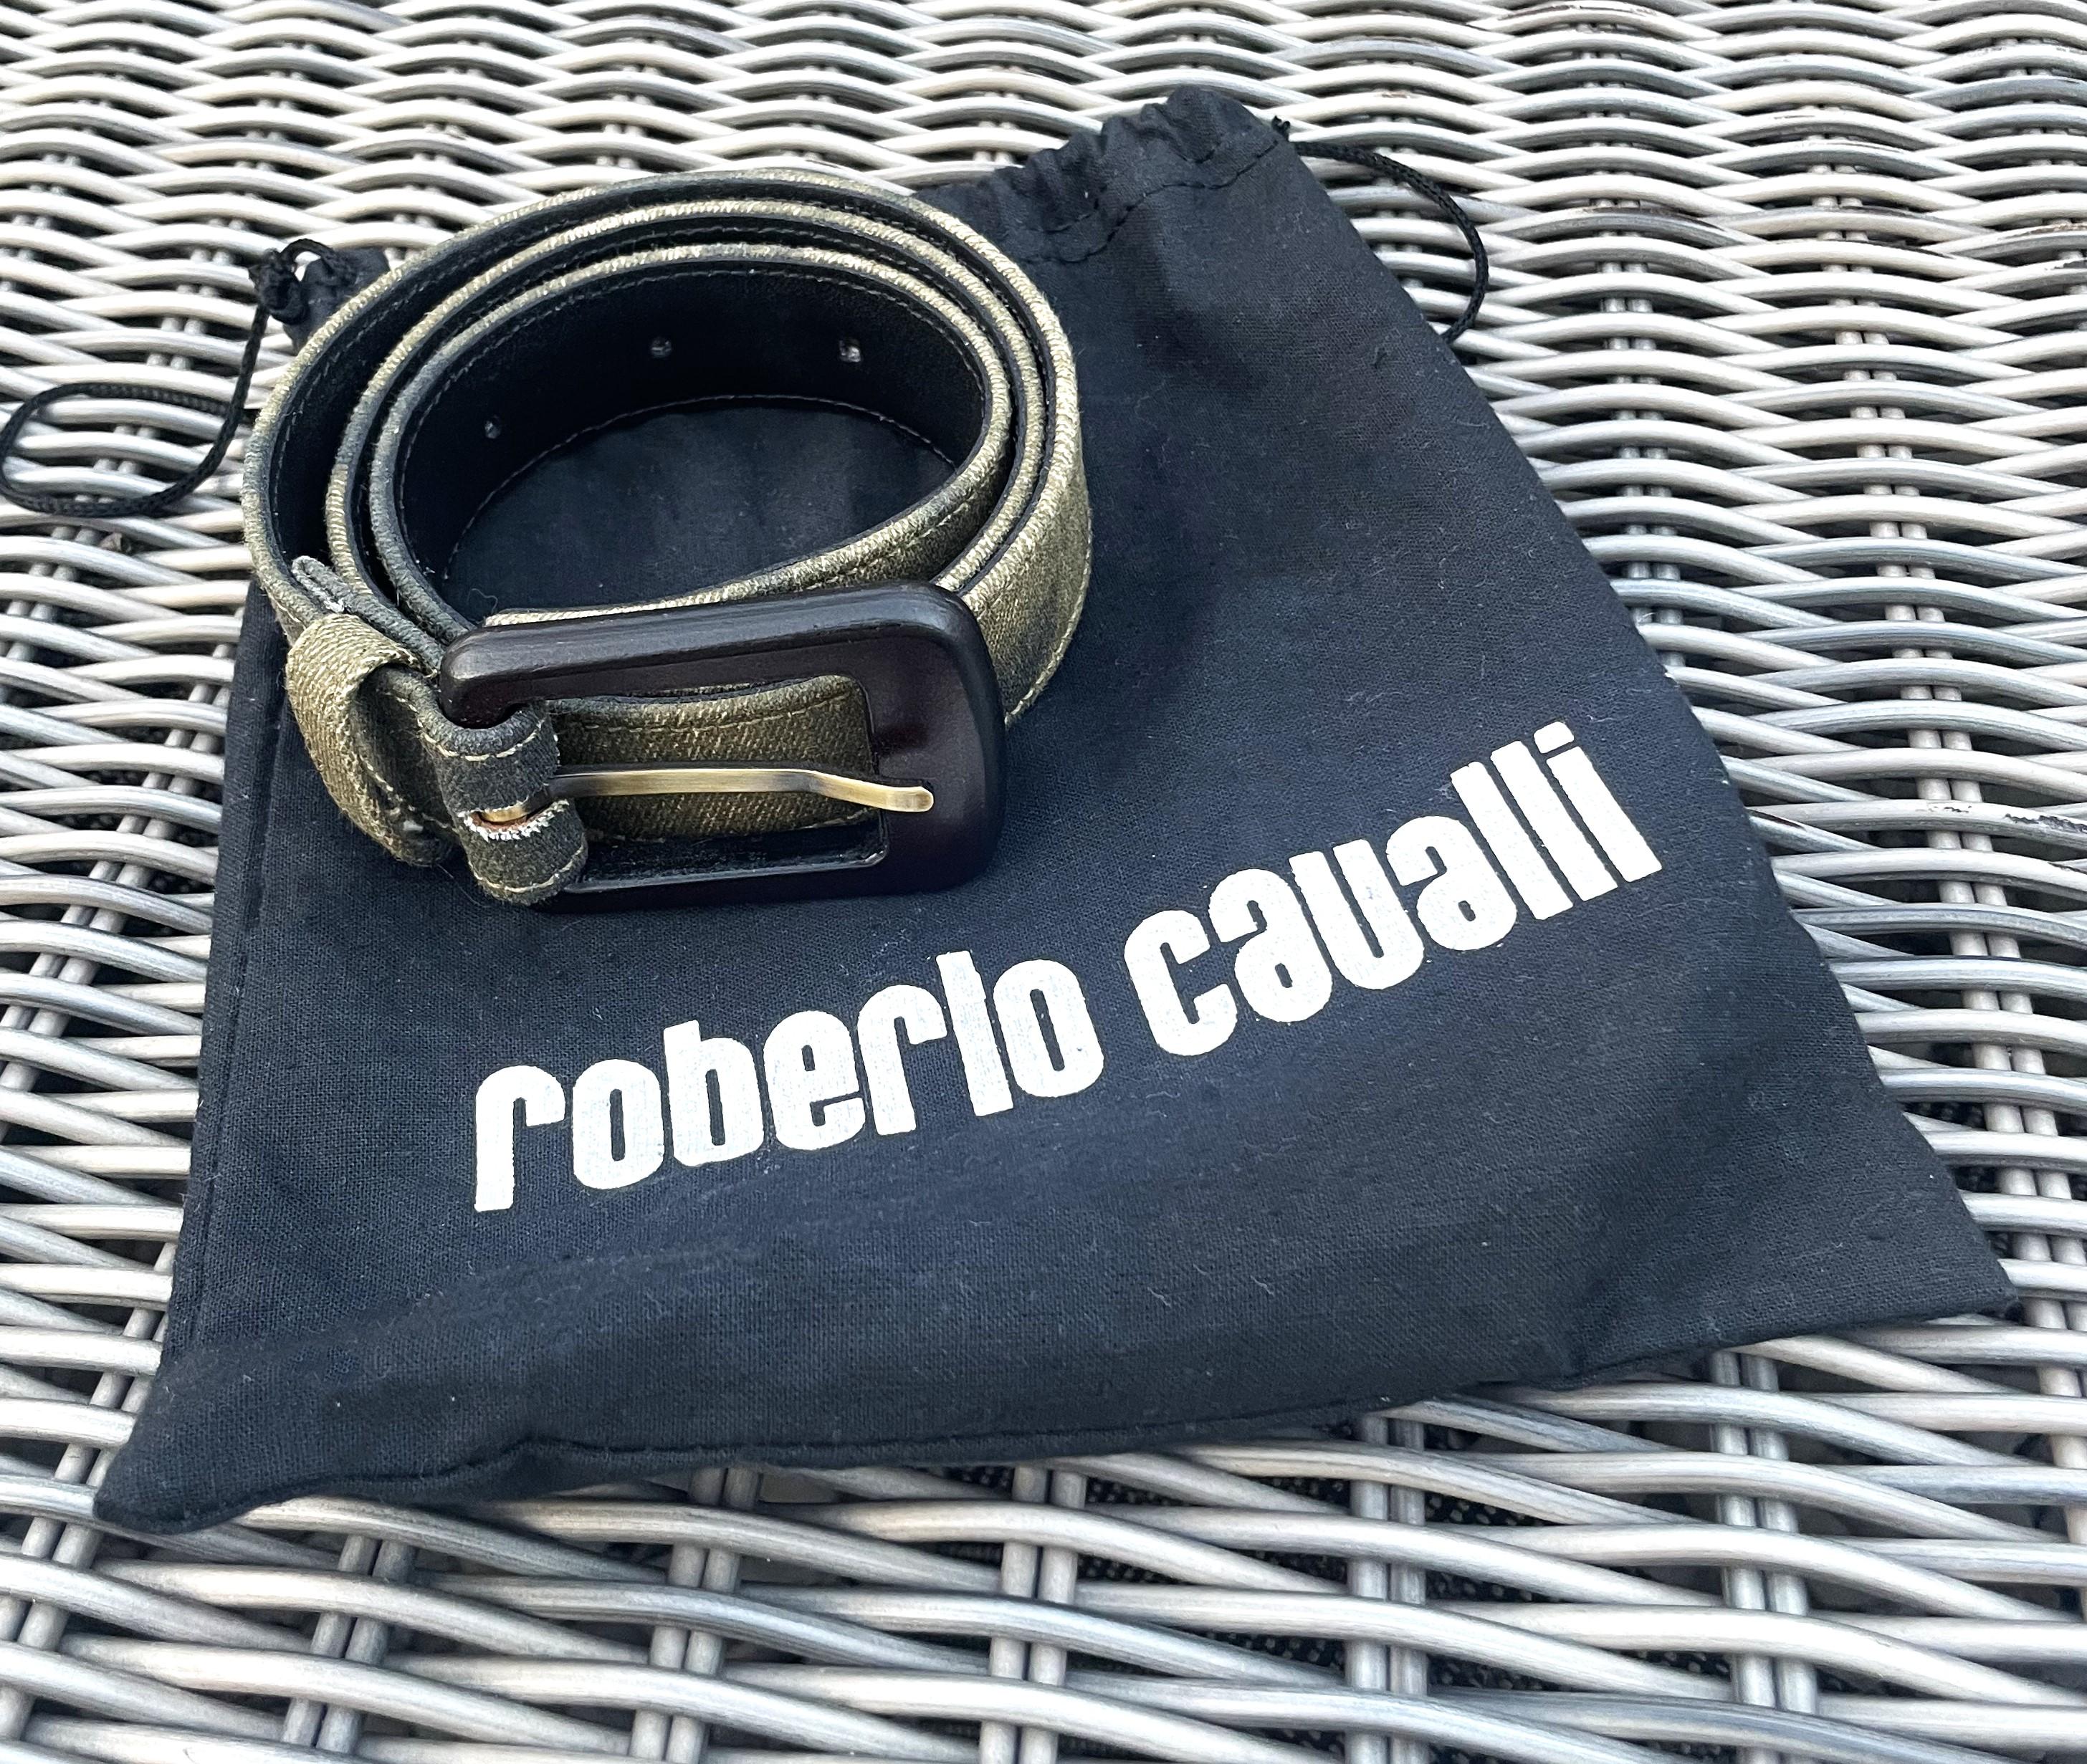 This one-of-a kind animal print belt designed by Roberto Cavalli often feature his signature style, which includes elements like animal prints. Animal prints such as leopard, snake, and zebra are commonly used in his designs, giving his belts a